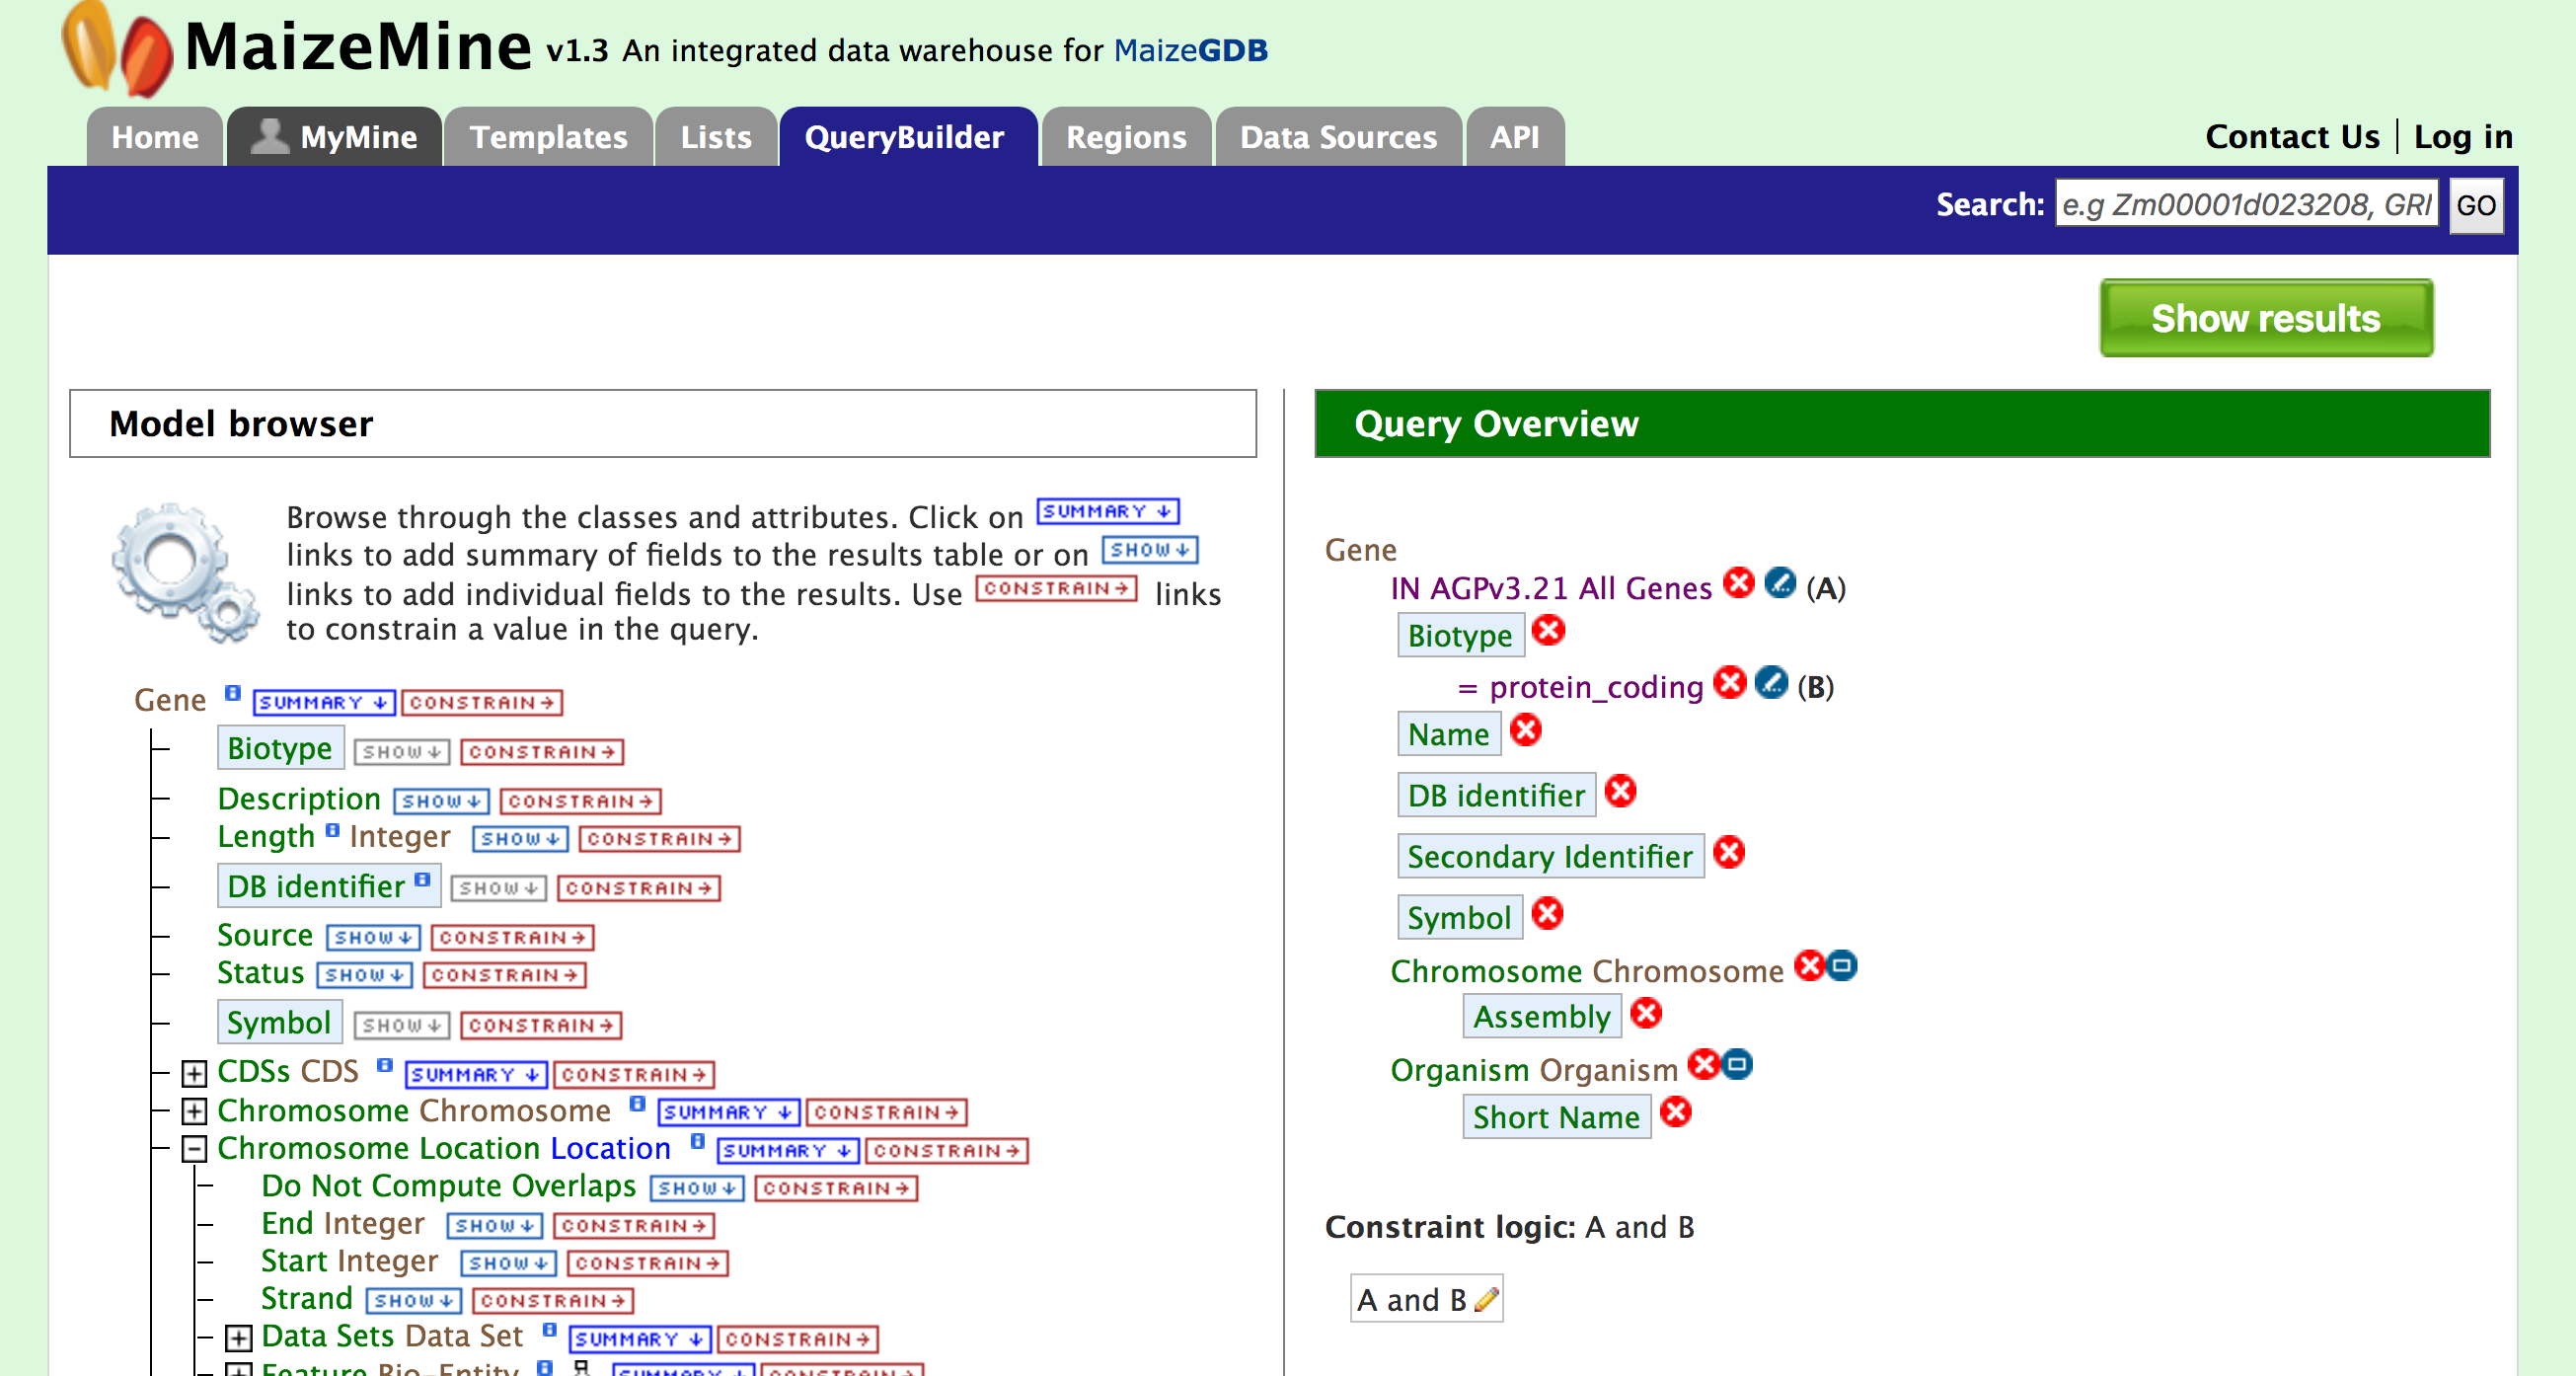 Model Browser showing the current query